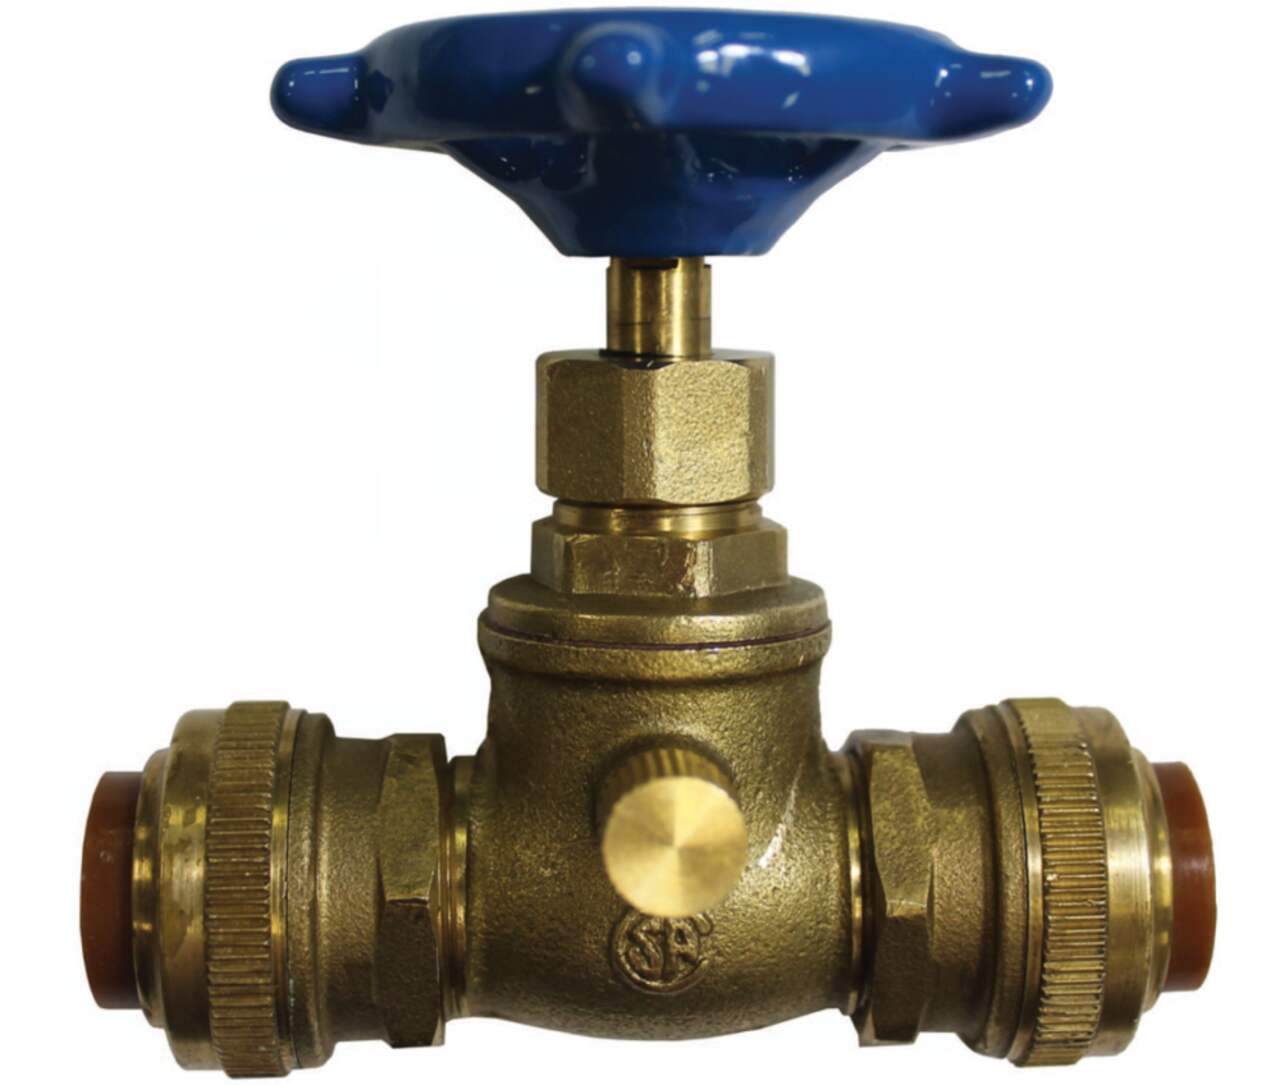 Waterline Push N' Connect Stop Valve/Ball Valve with Waste, 1/2-in